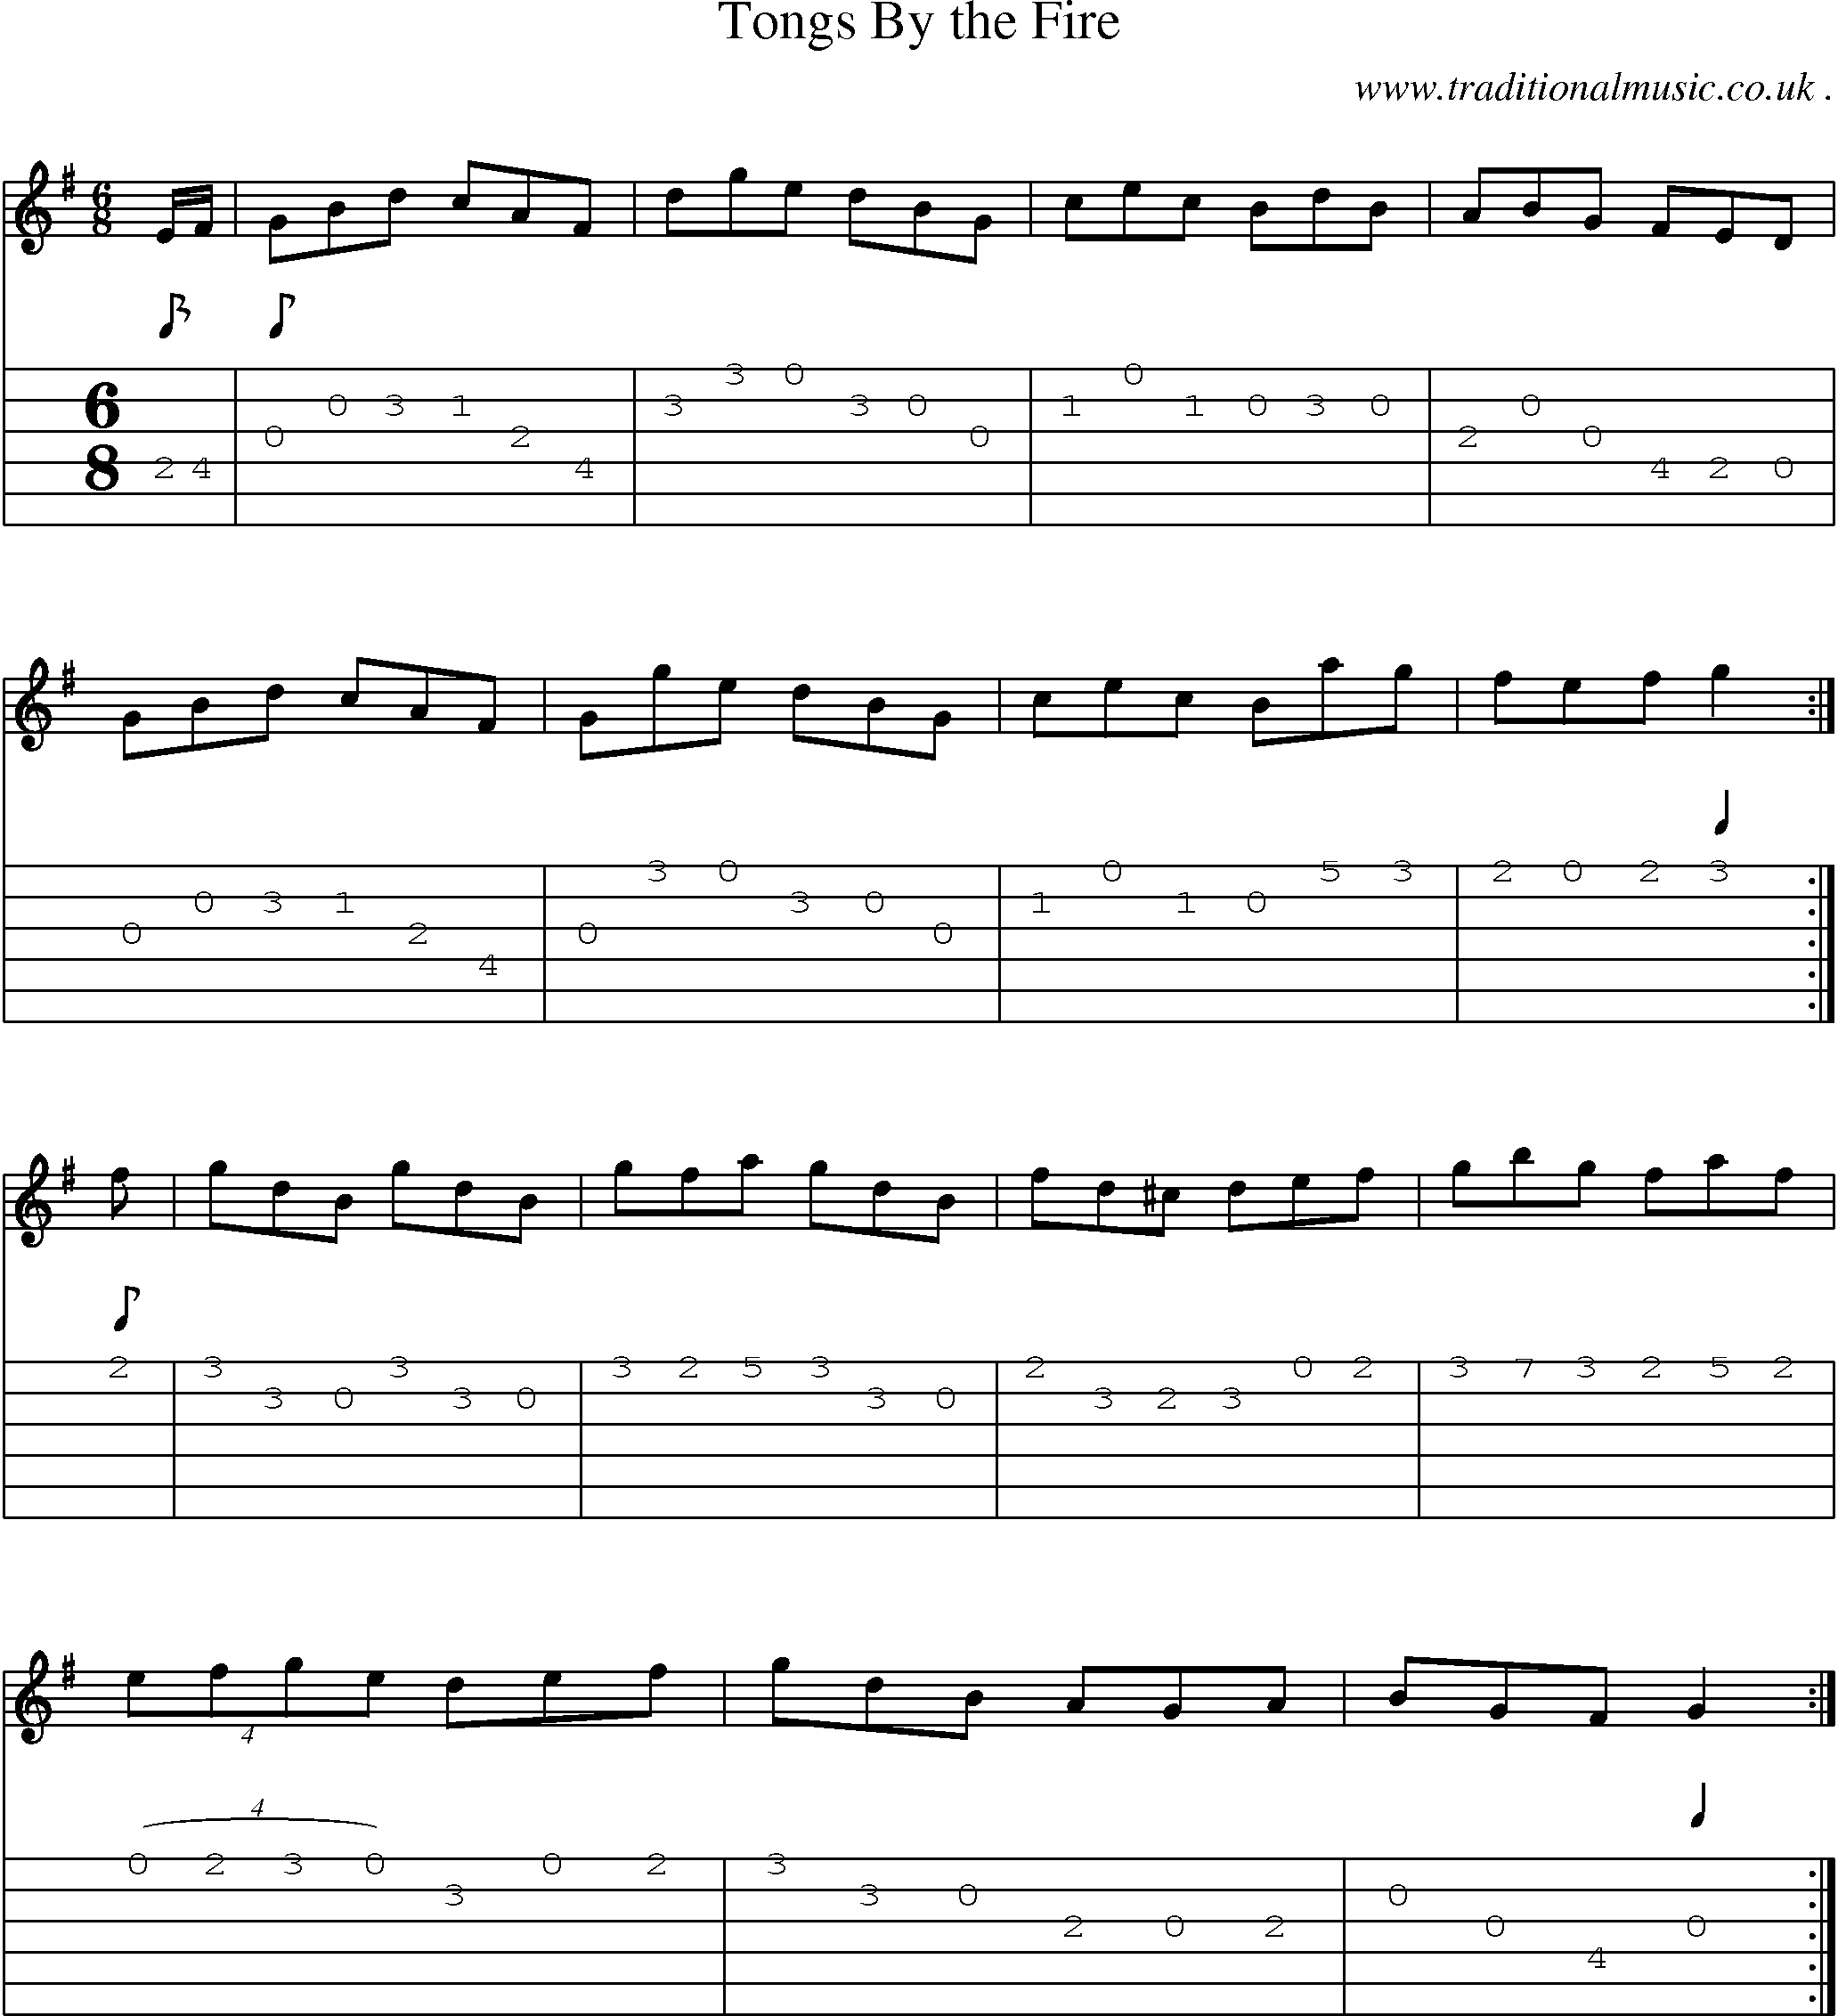 Sheet-Music and Guitar Tabs for Tongs By The Fire